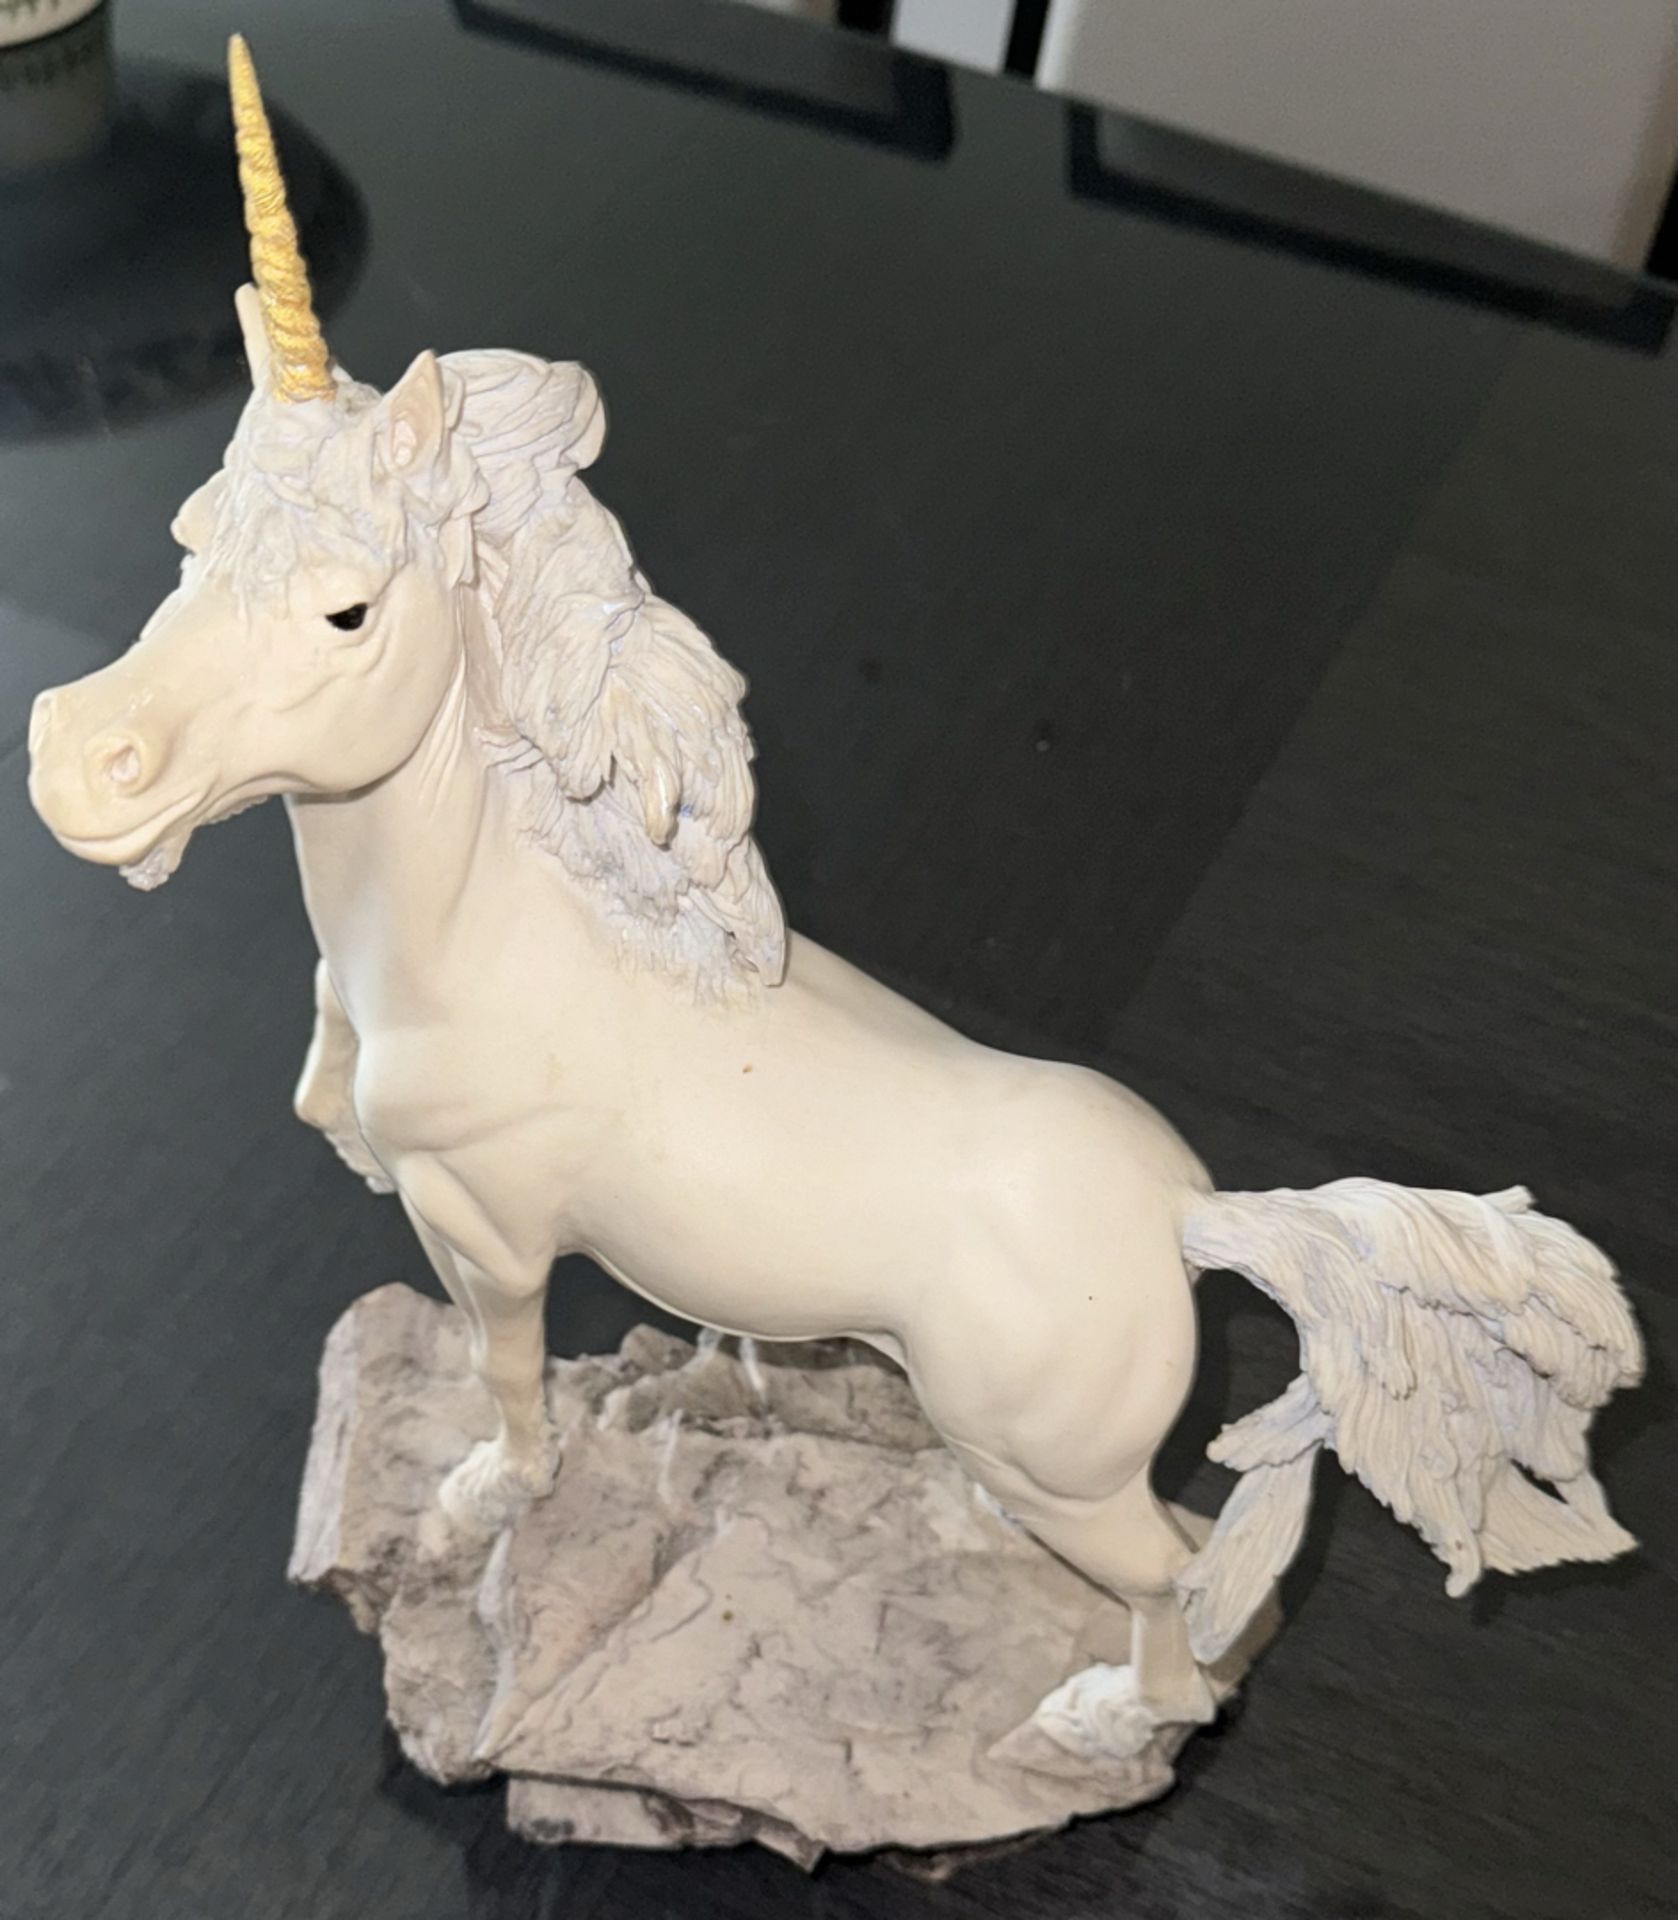 Royal Doulton Fables Unicorn Monarch - Rare Ltd Edition Sculpture with Framed COA - Image 8 of 9